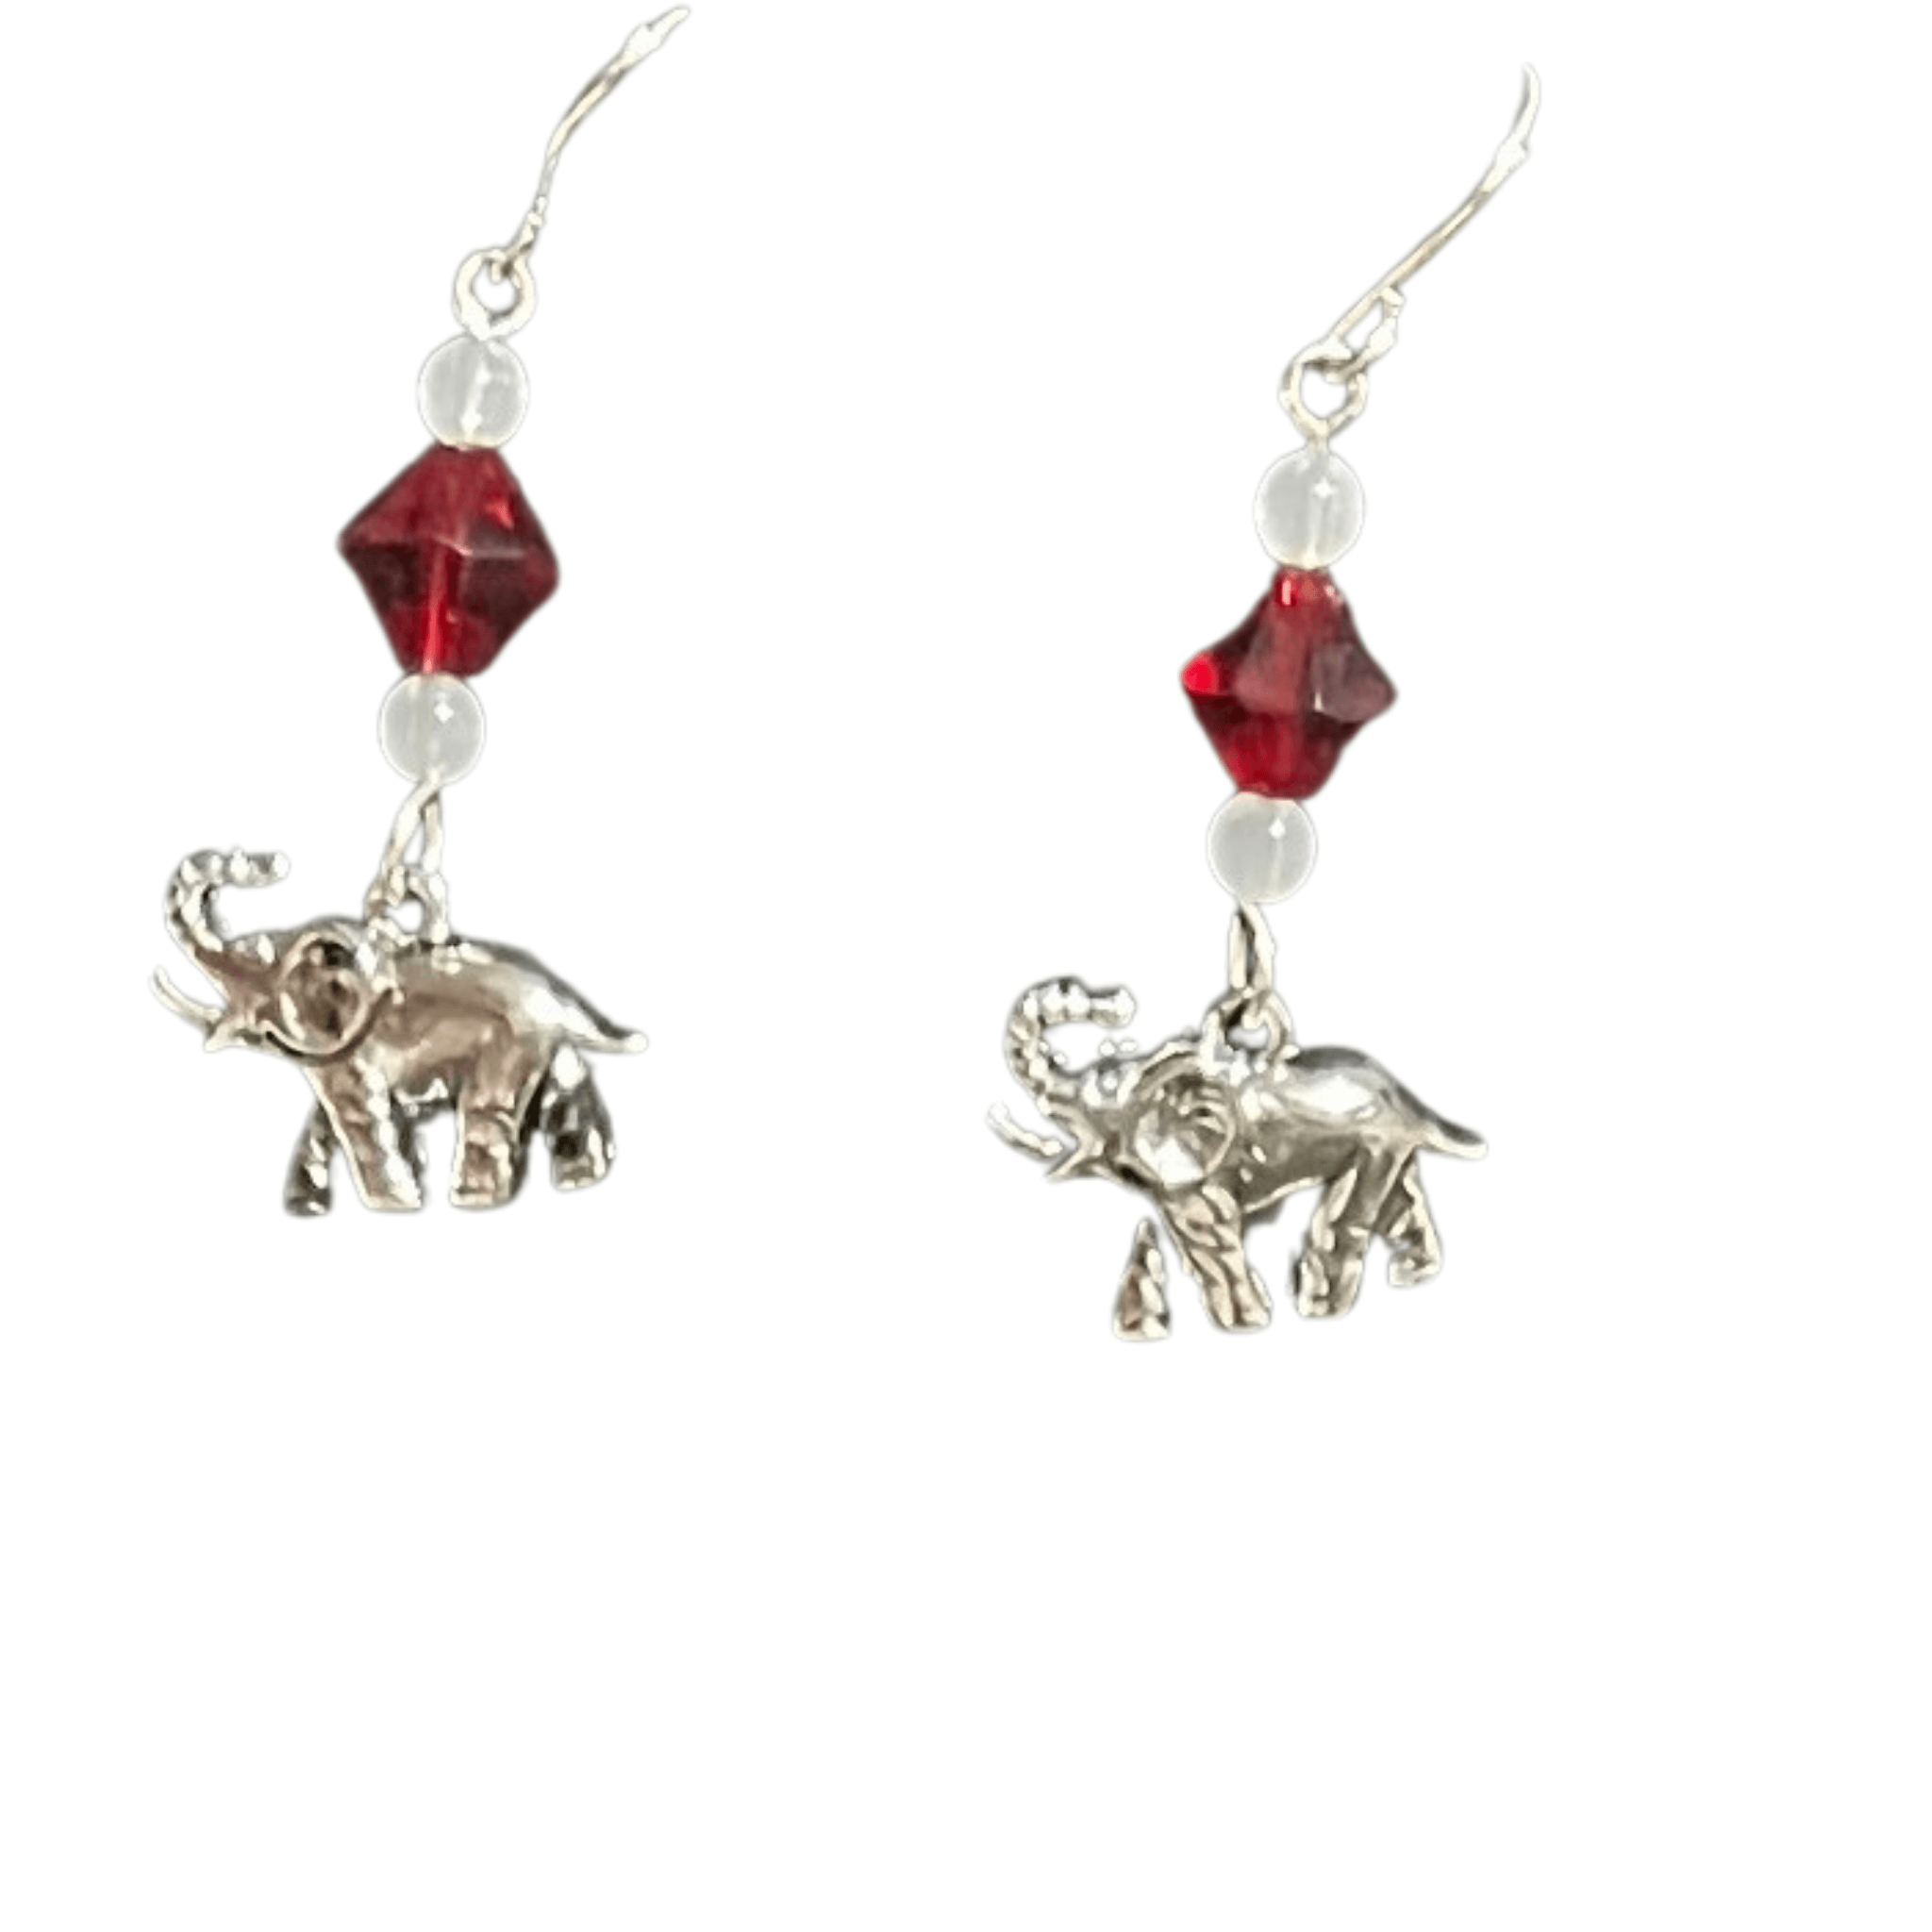 Elephant Charm Earrings with Ruby and Crystal Accent Beads - shopsmitees